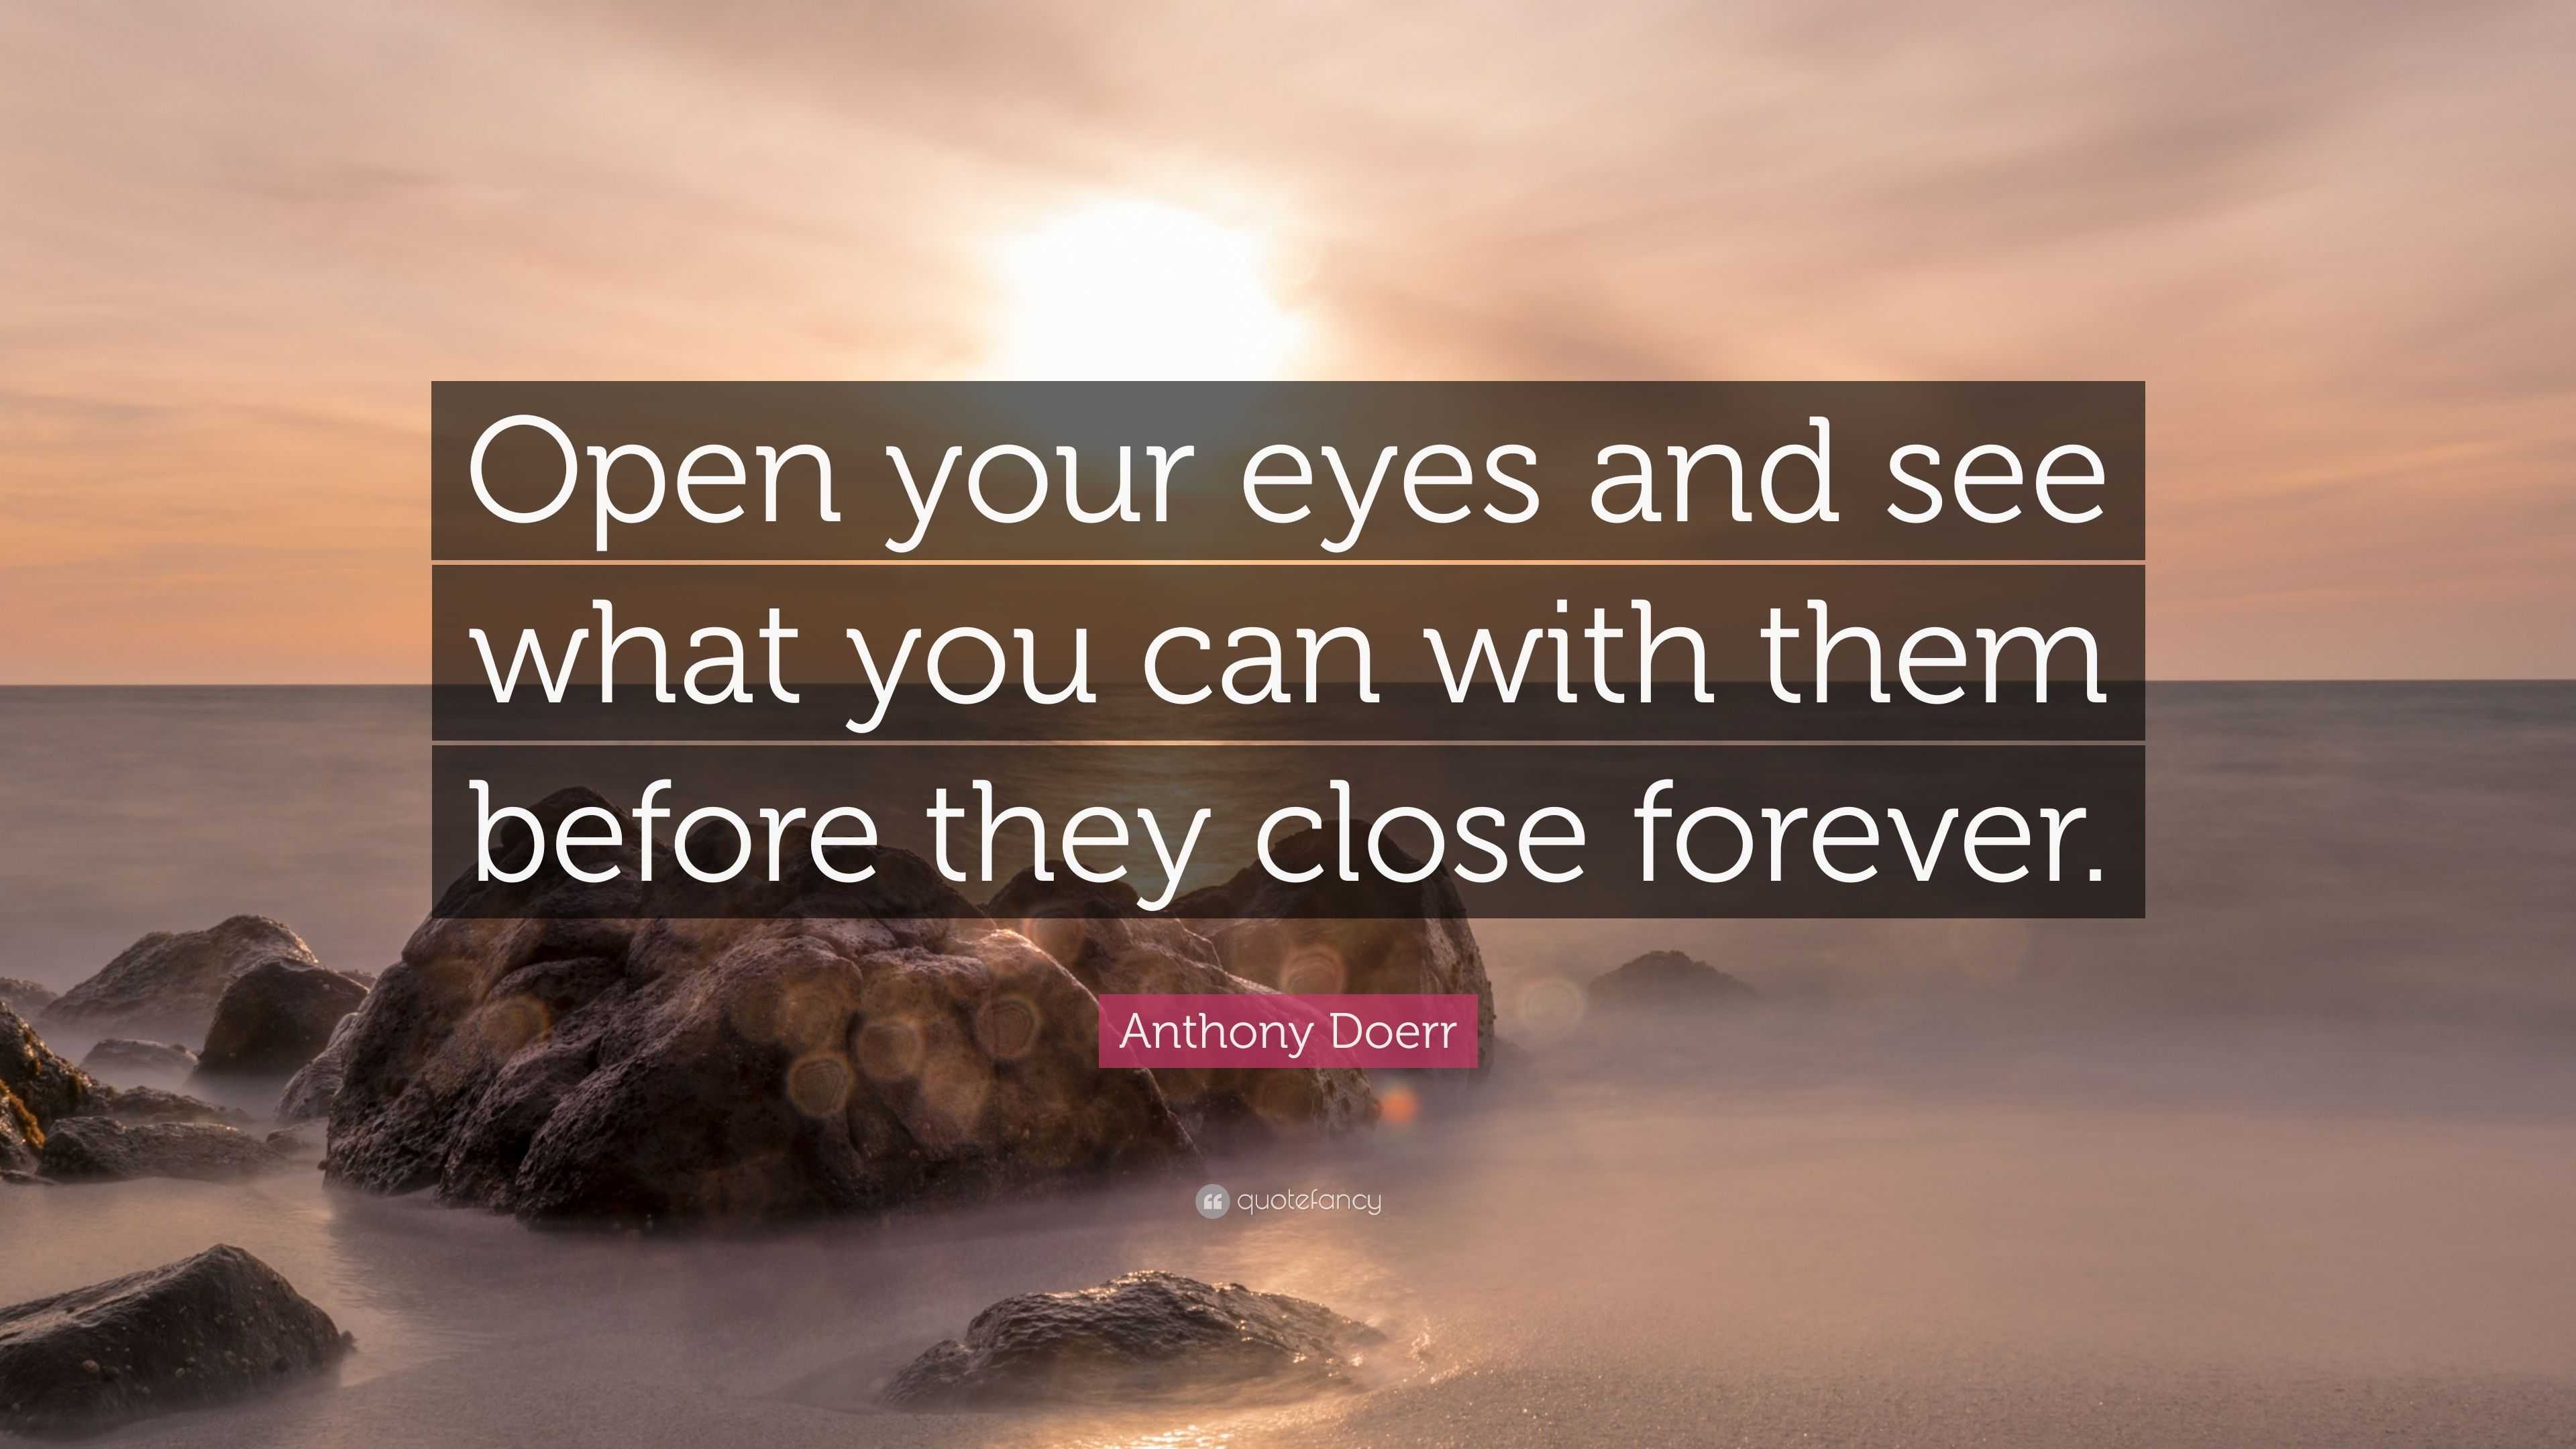 Anthony Doerr Quote “open Your Eyes And See What You Can With Them Before They Close Forever” 7435